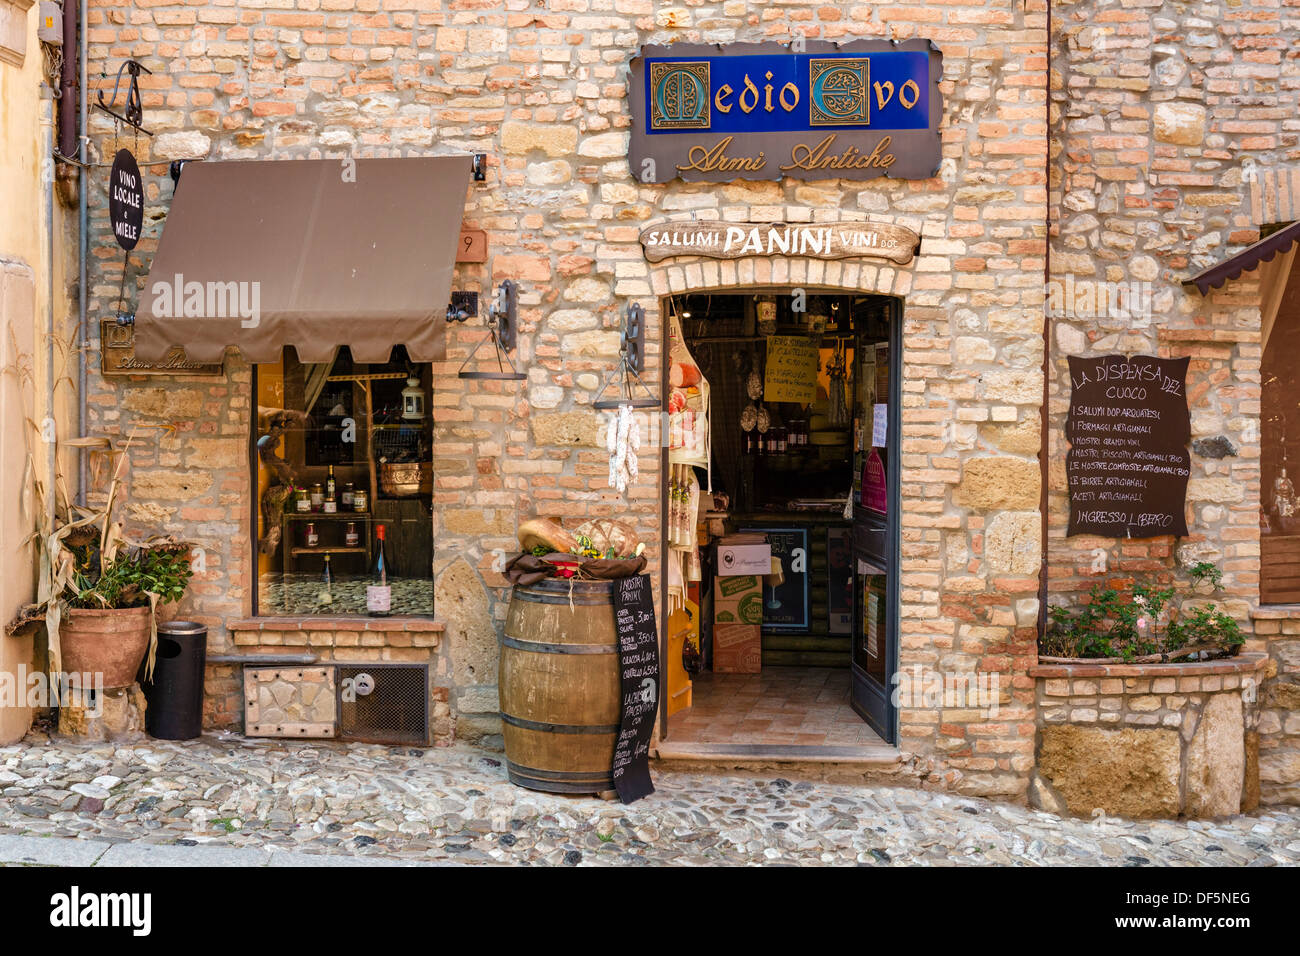 Tradional shop selling bread, wine and meats in centre of medieval old town of Castell'Arquato, Piacenza, Emilia Romagna, Italy Stock Photo